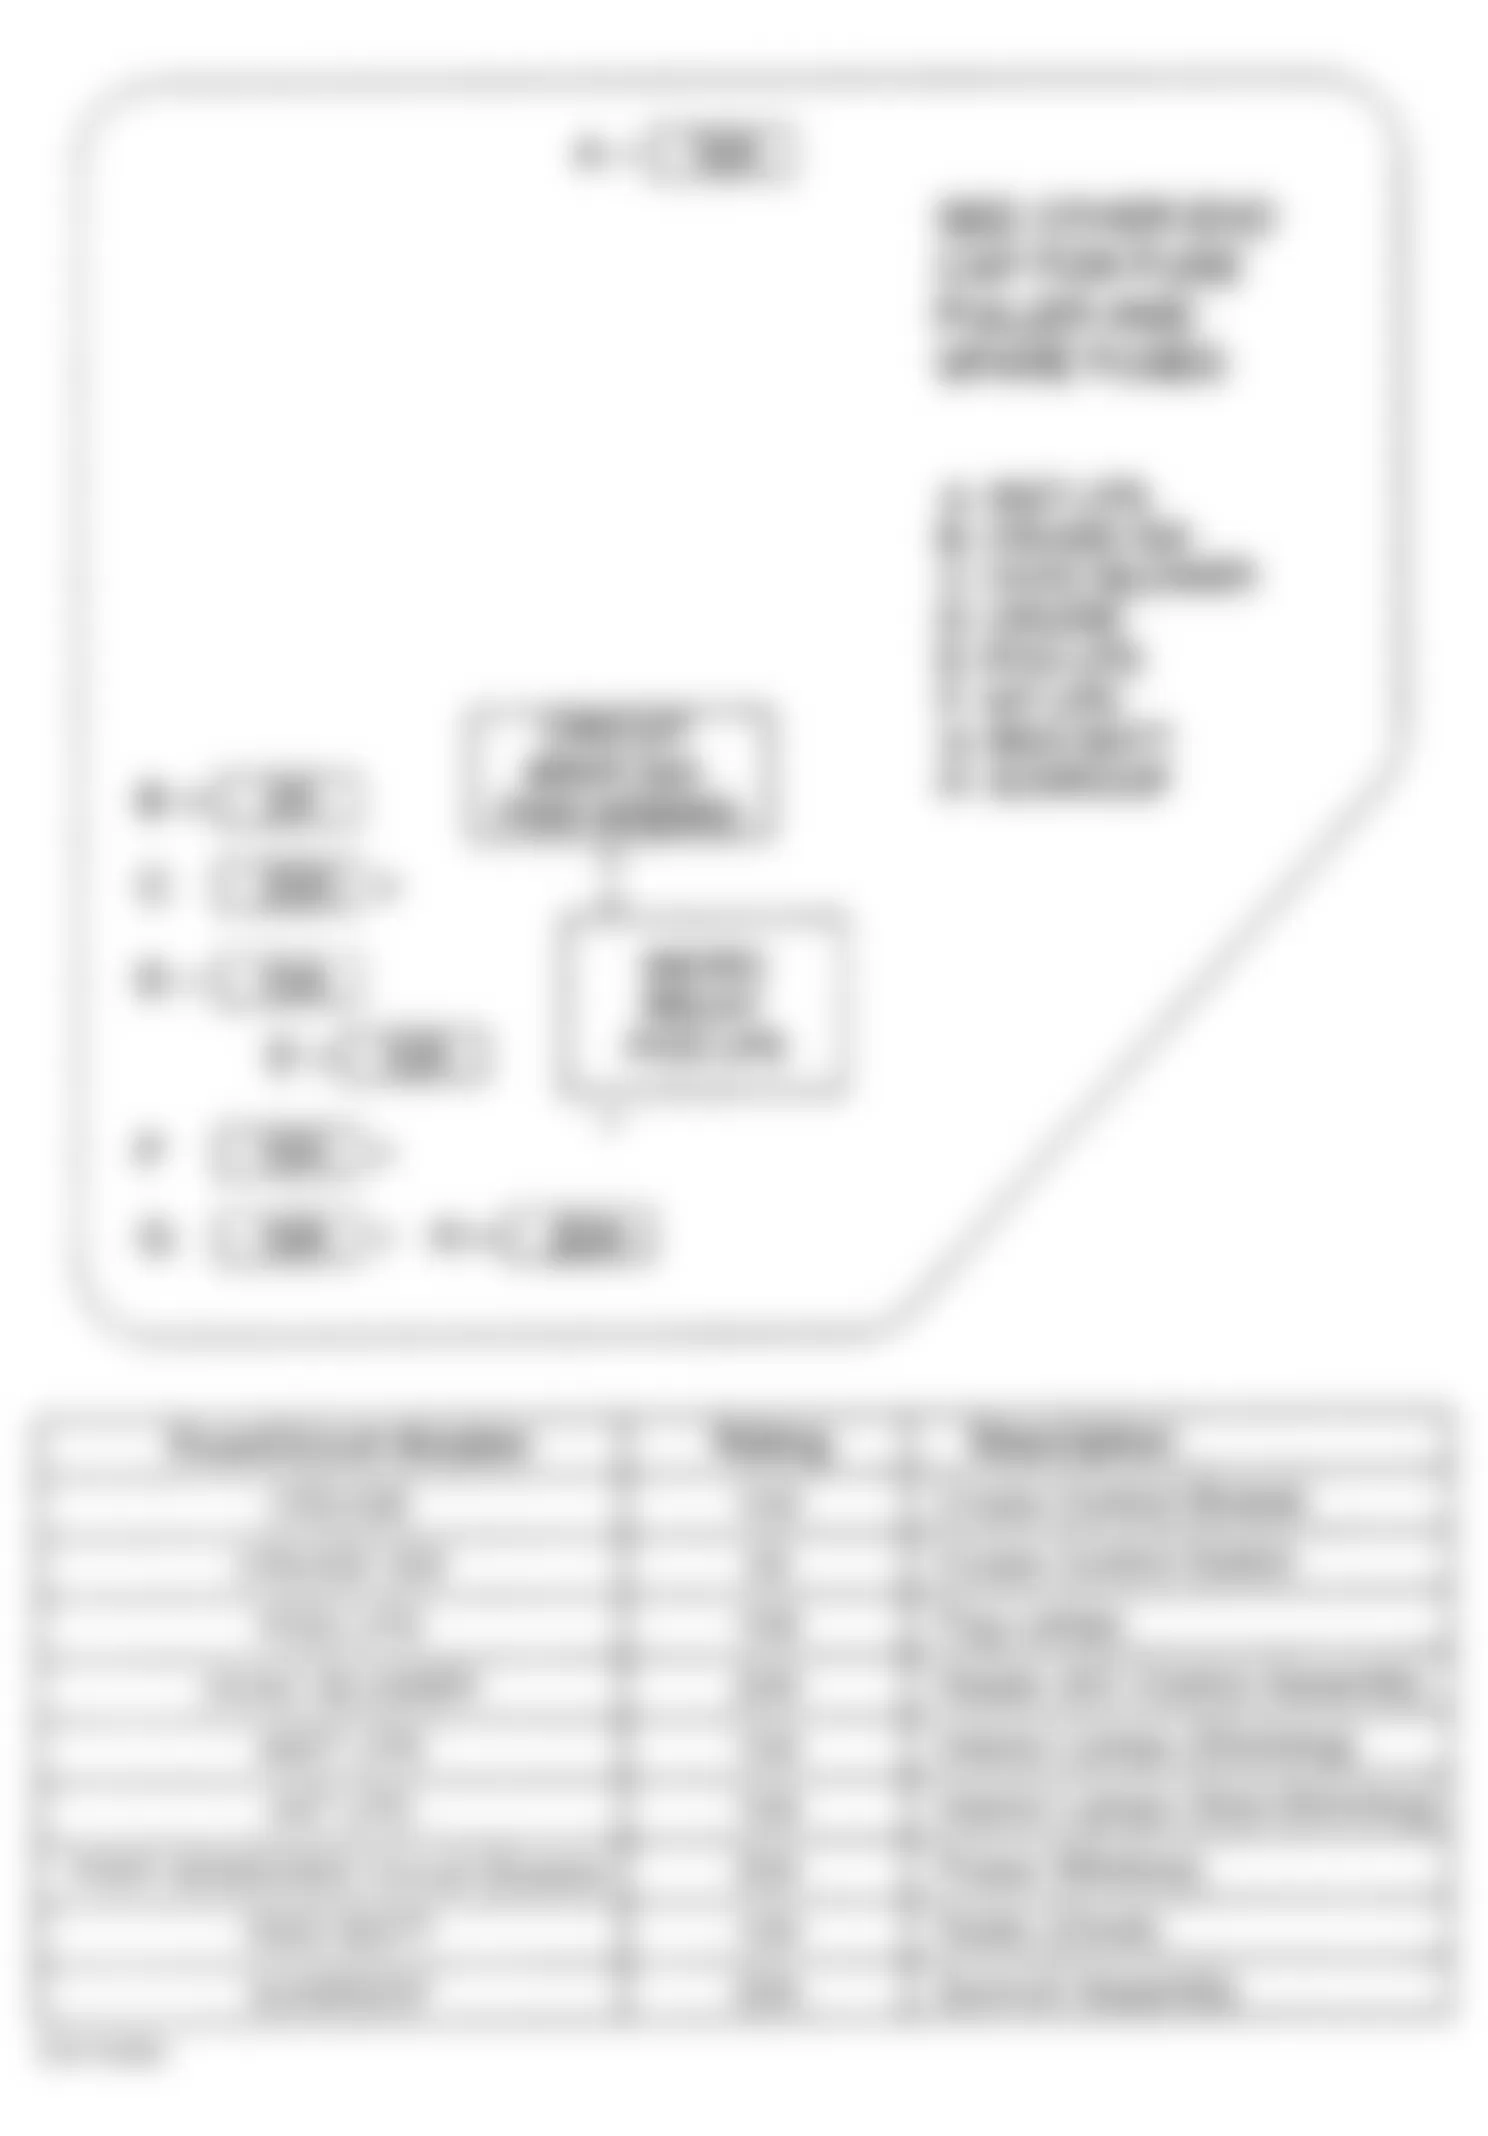 Chevrolet Malibu 2000 - Component Locations -  Identifying Right Instrument Panel Junction Block Components